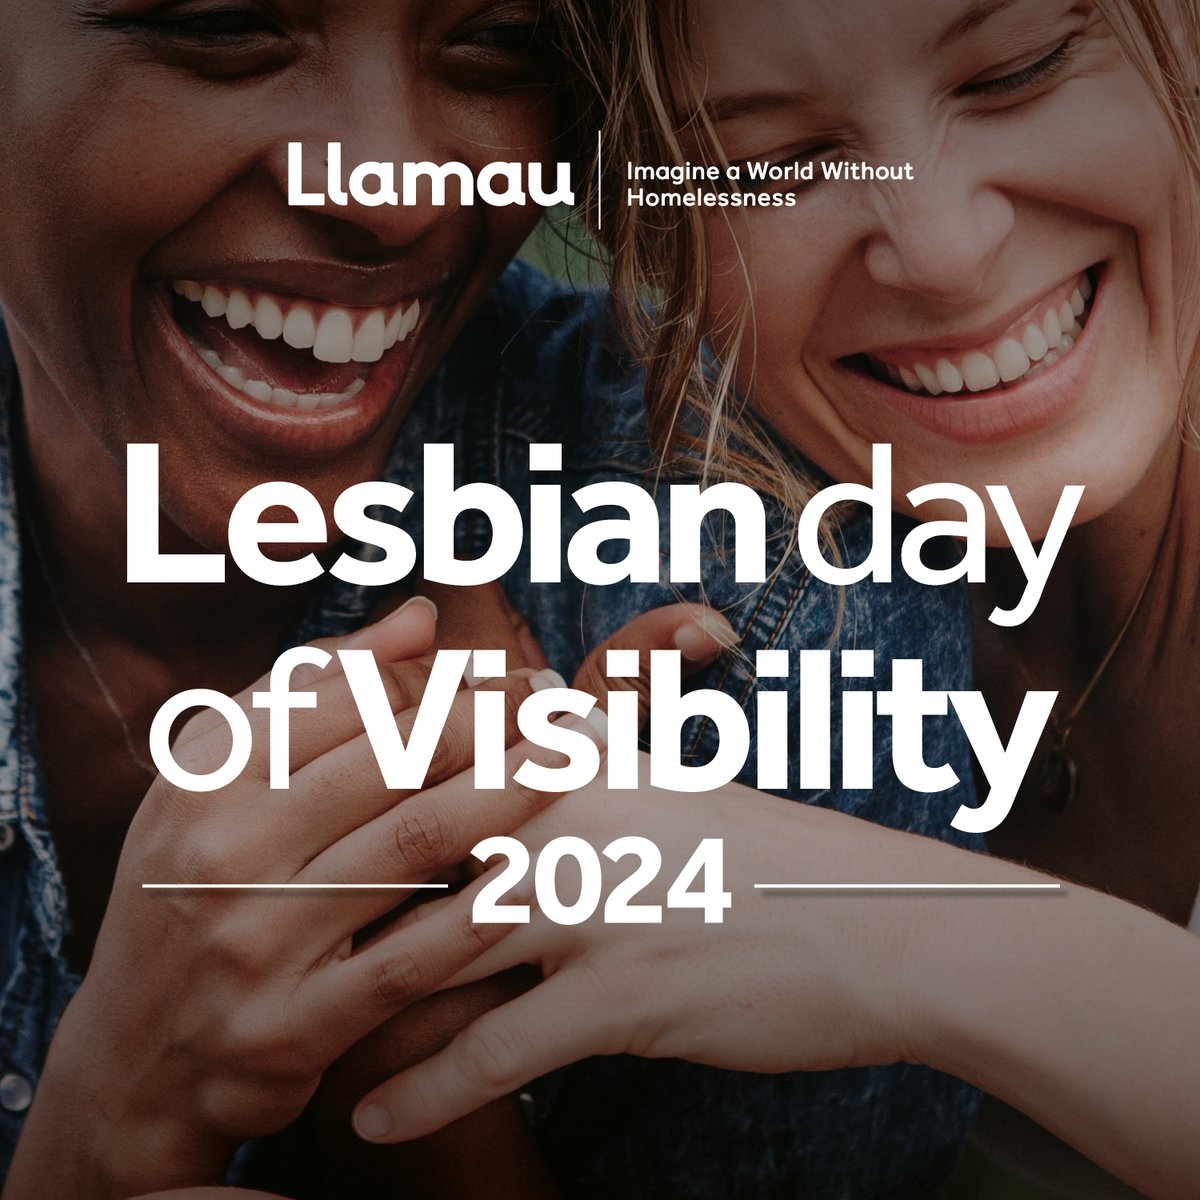 🌈 On Lesbian Day of Visibility, let's recognise the influence of the lesbian movement in the UK! From challenges to victories, lesbians have been pivotal in promoting equality for all. Click here and see how Llamau is creating inclusive women's shelters: ow.ly/vWYE50Ro9jW